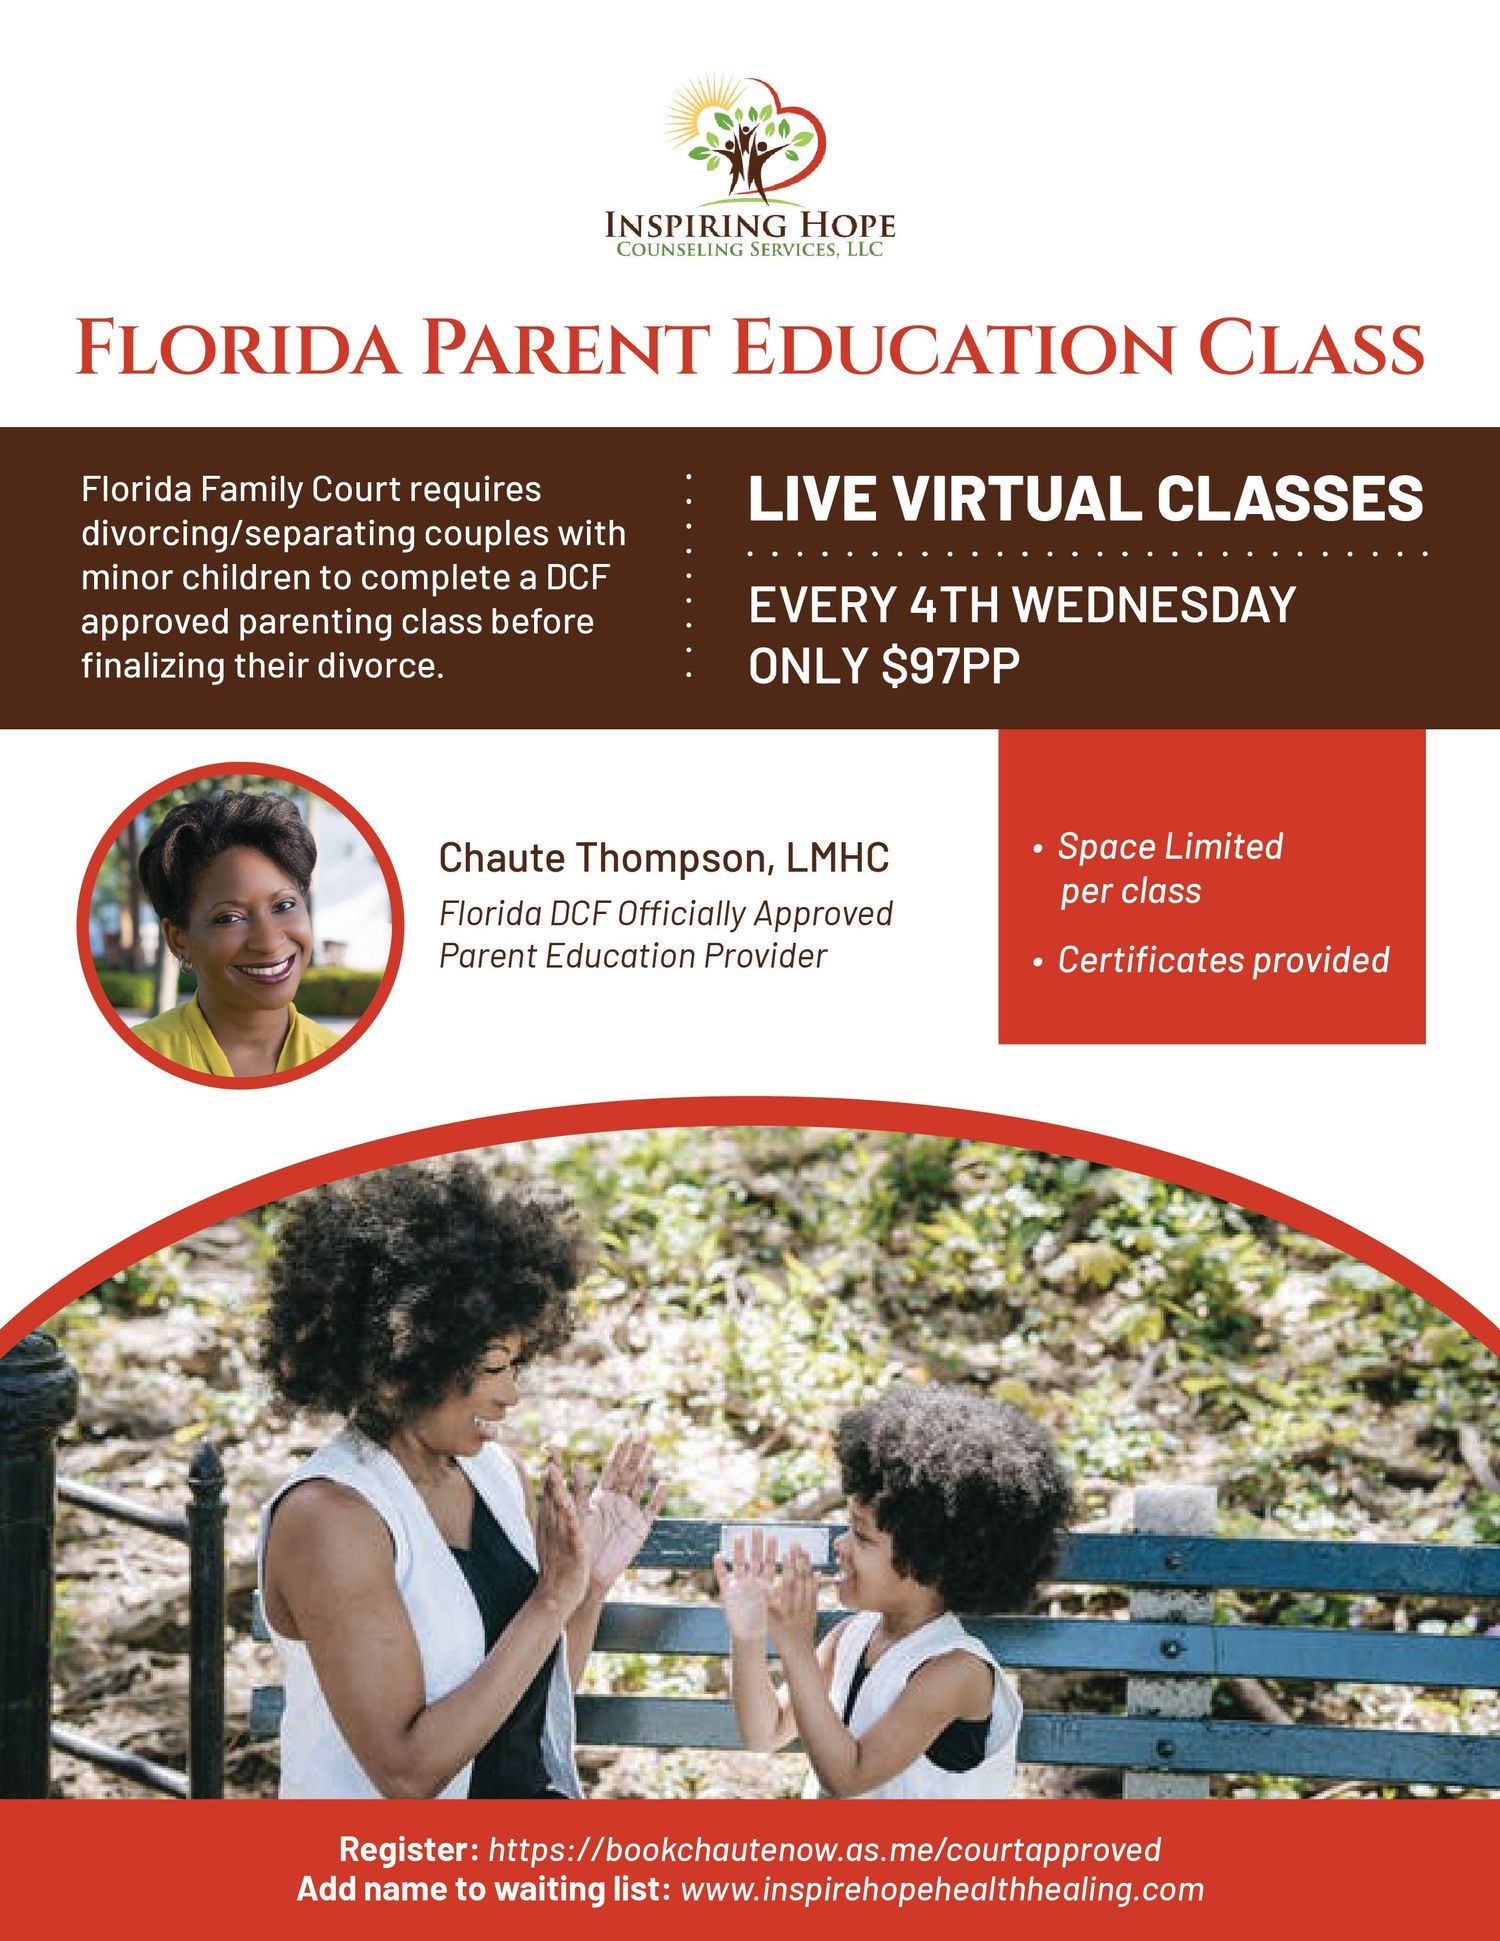 Gallery Photo of Court Approved Parenting Class... When going through a divorce or separation the court requires you to take a parenting class. Certificate provided. 